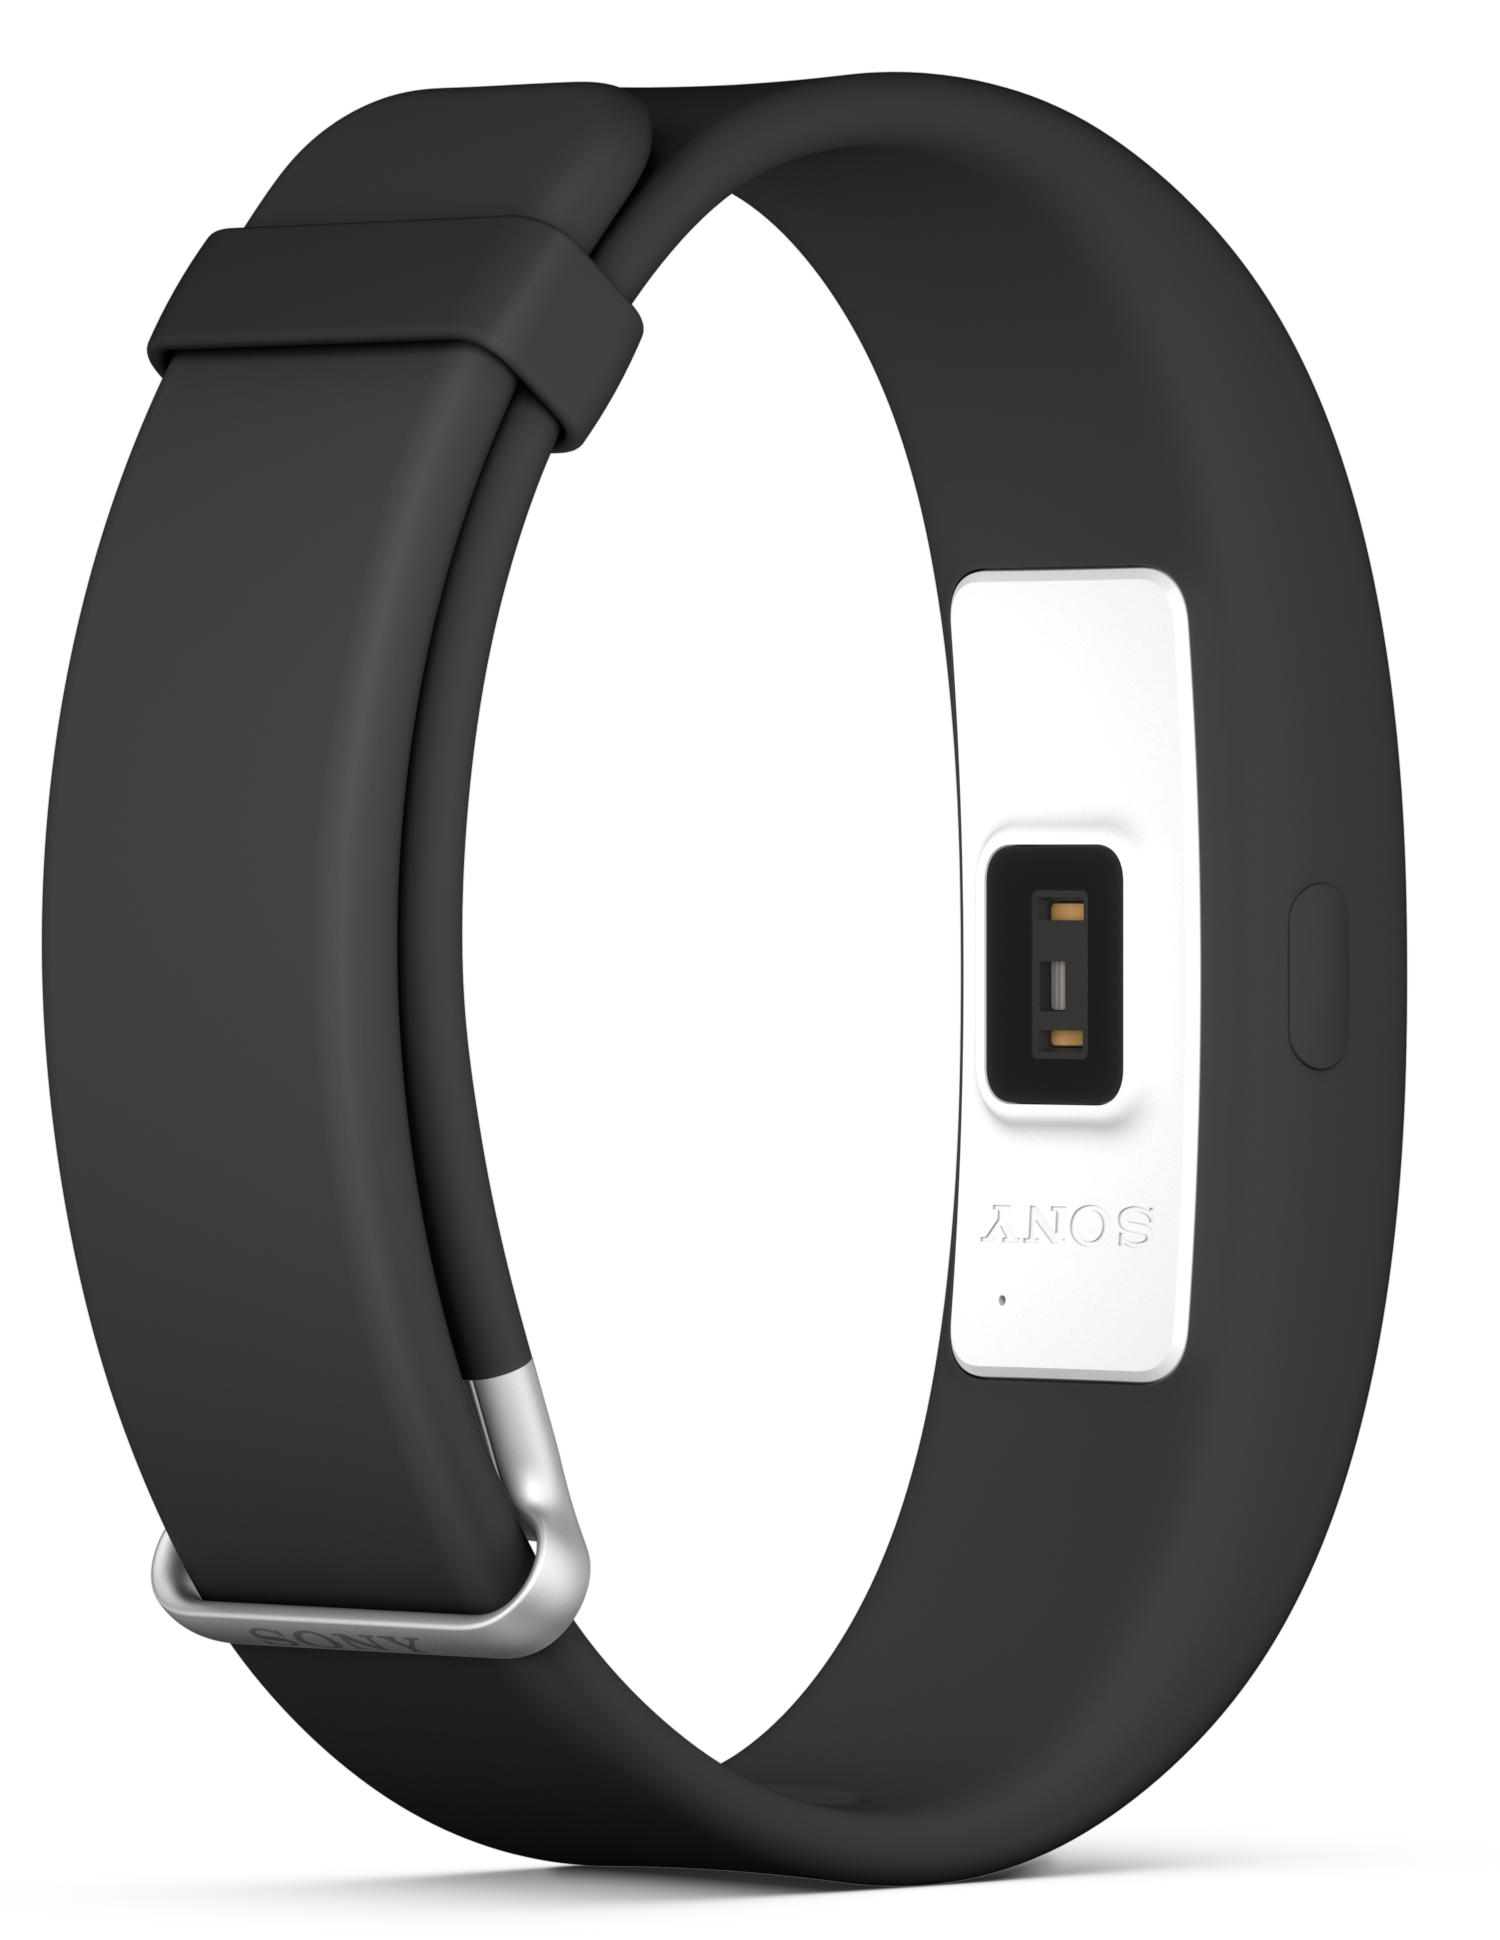 Sony SmartBand 2 goes official: fitness and sleep tracker equipped with heart rate sensor